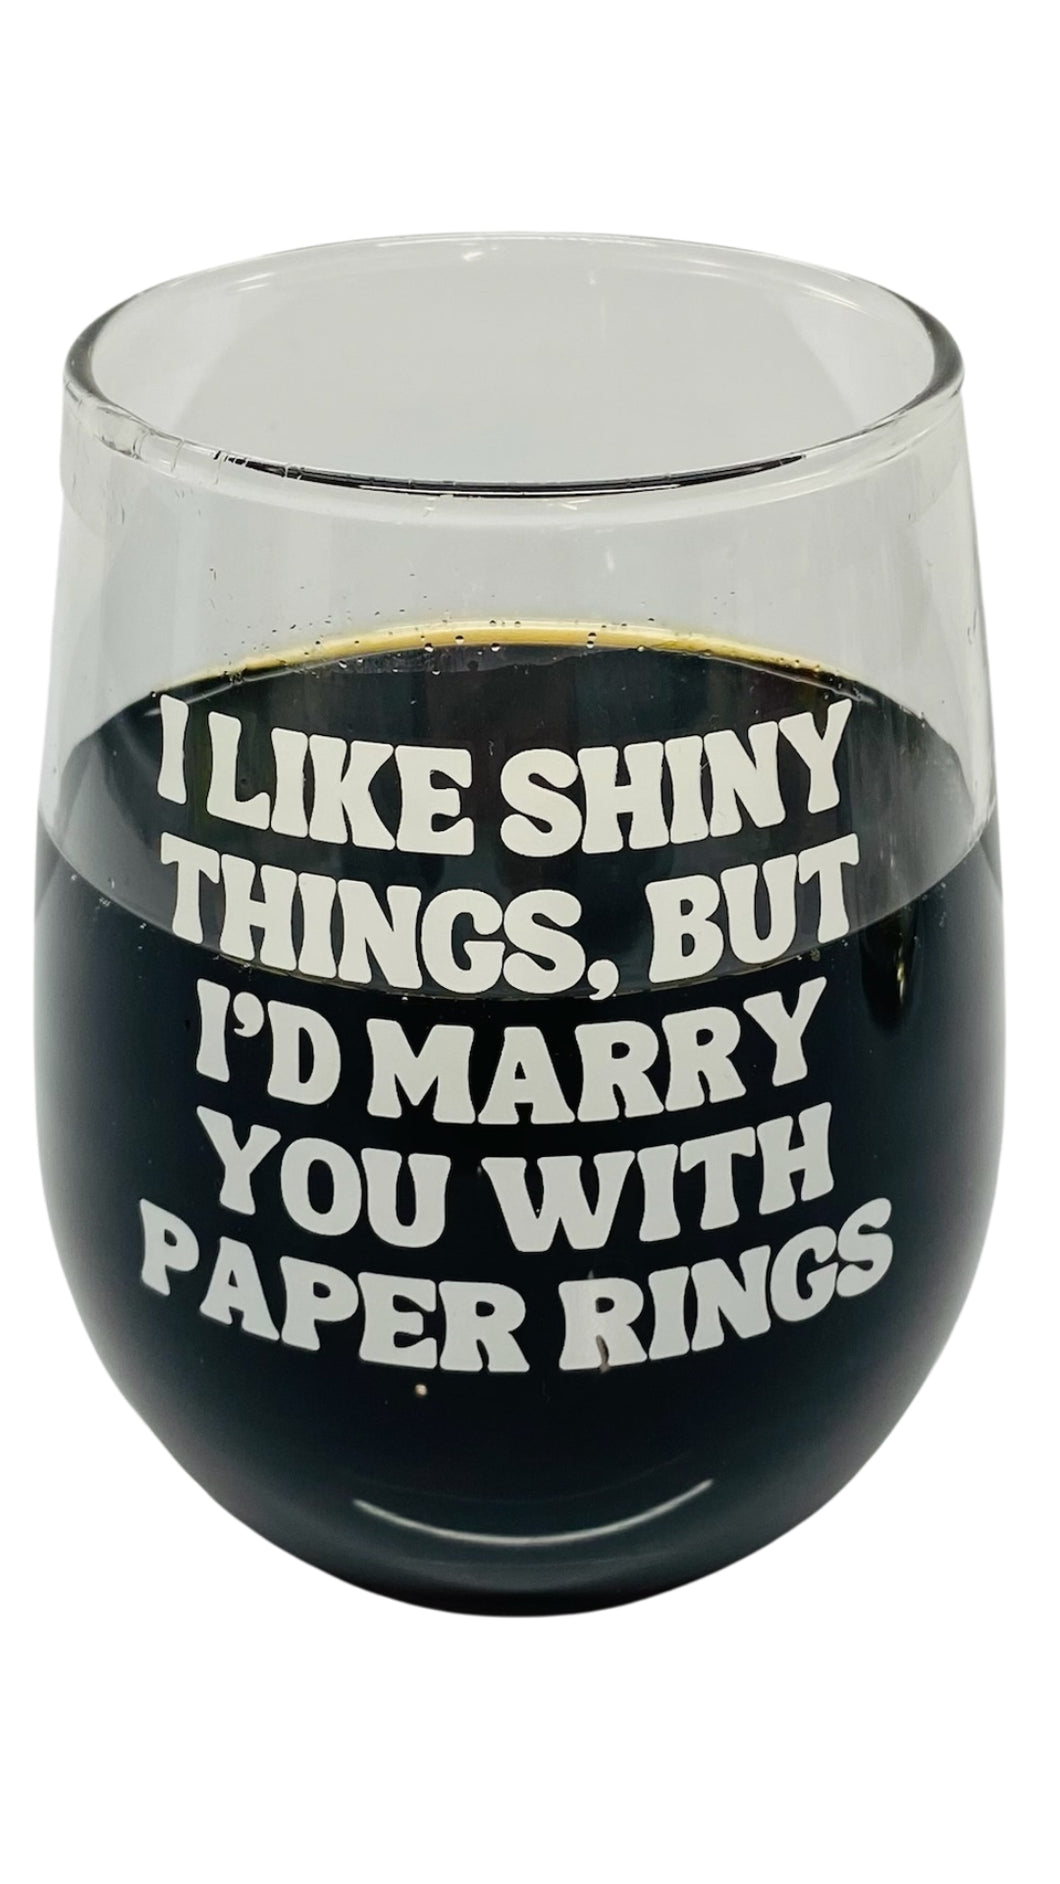 Paper Rings Stemless